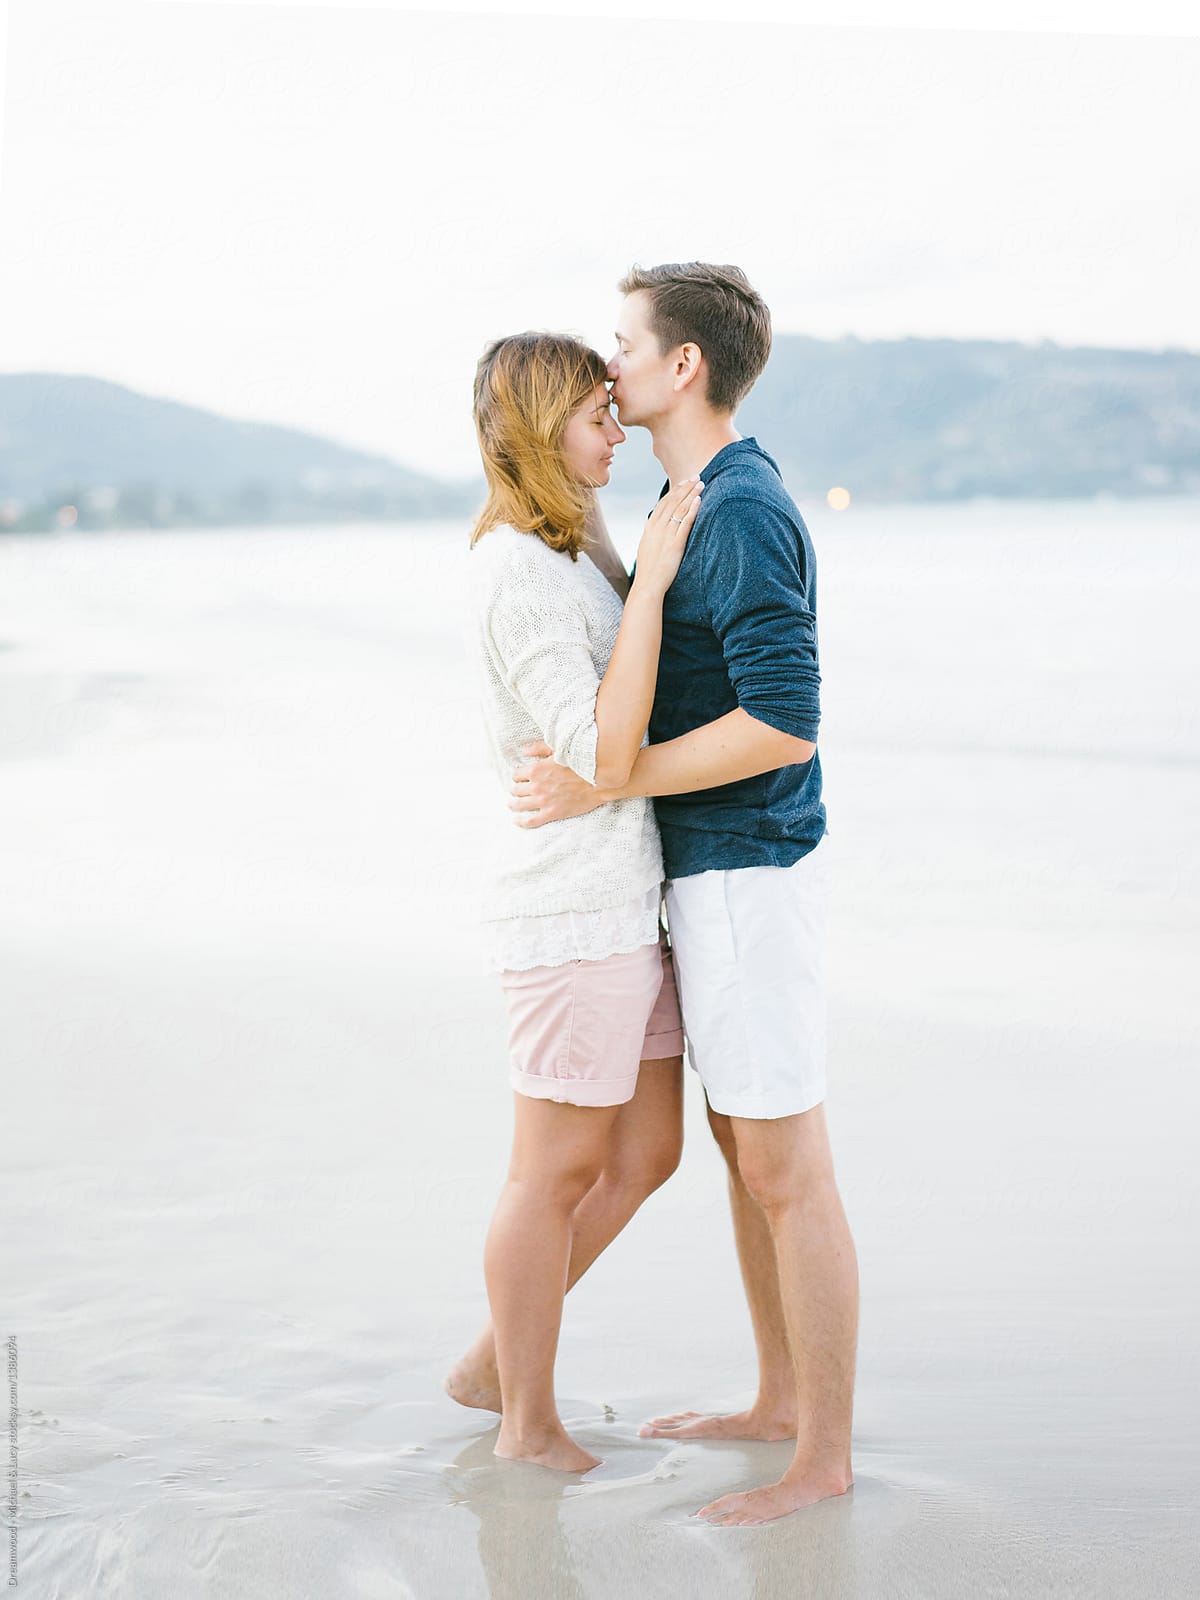 Casual Couples Photography Poses - Lemon8 Search